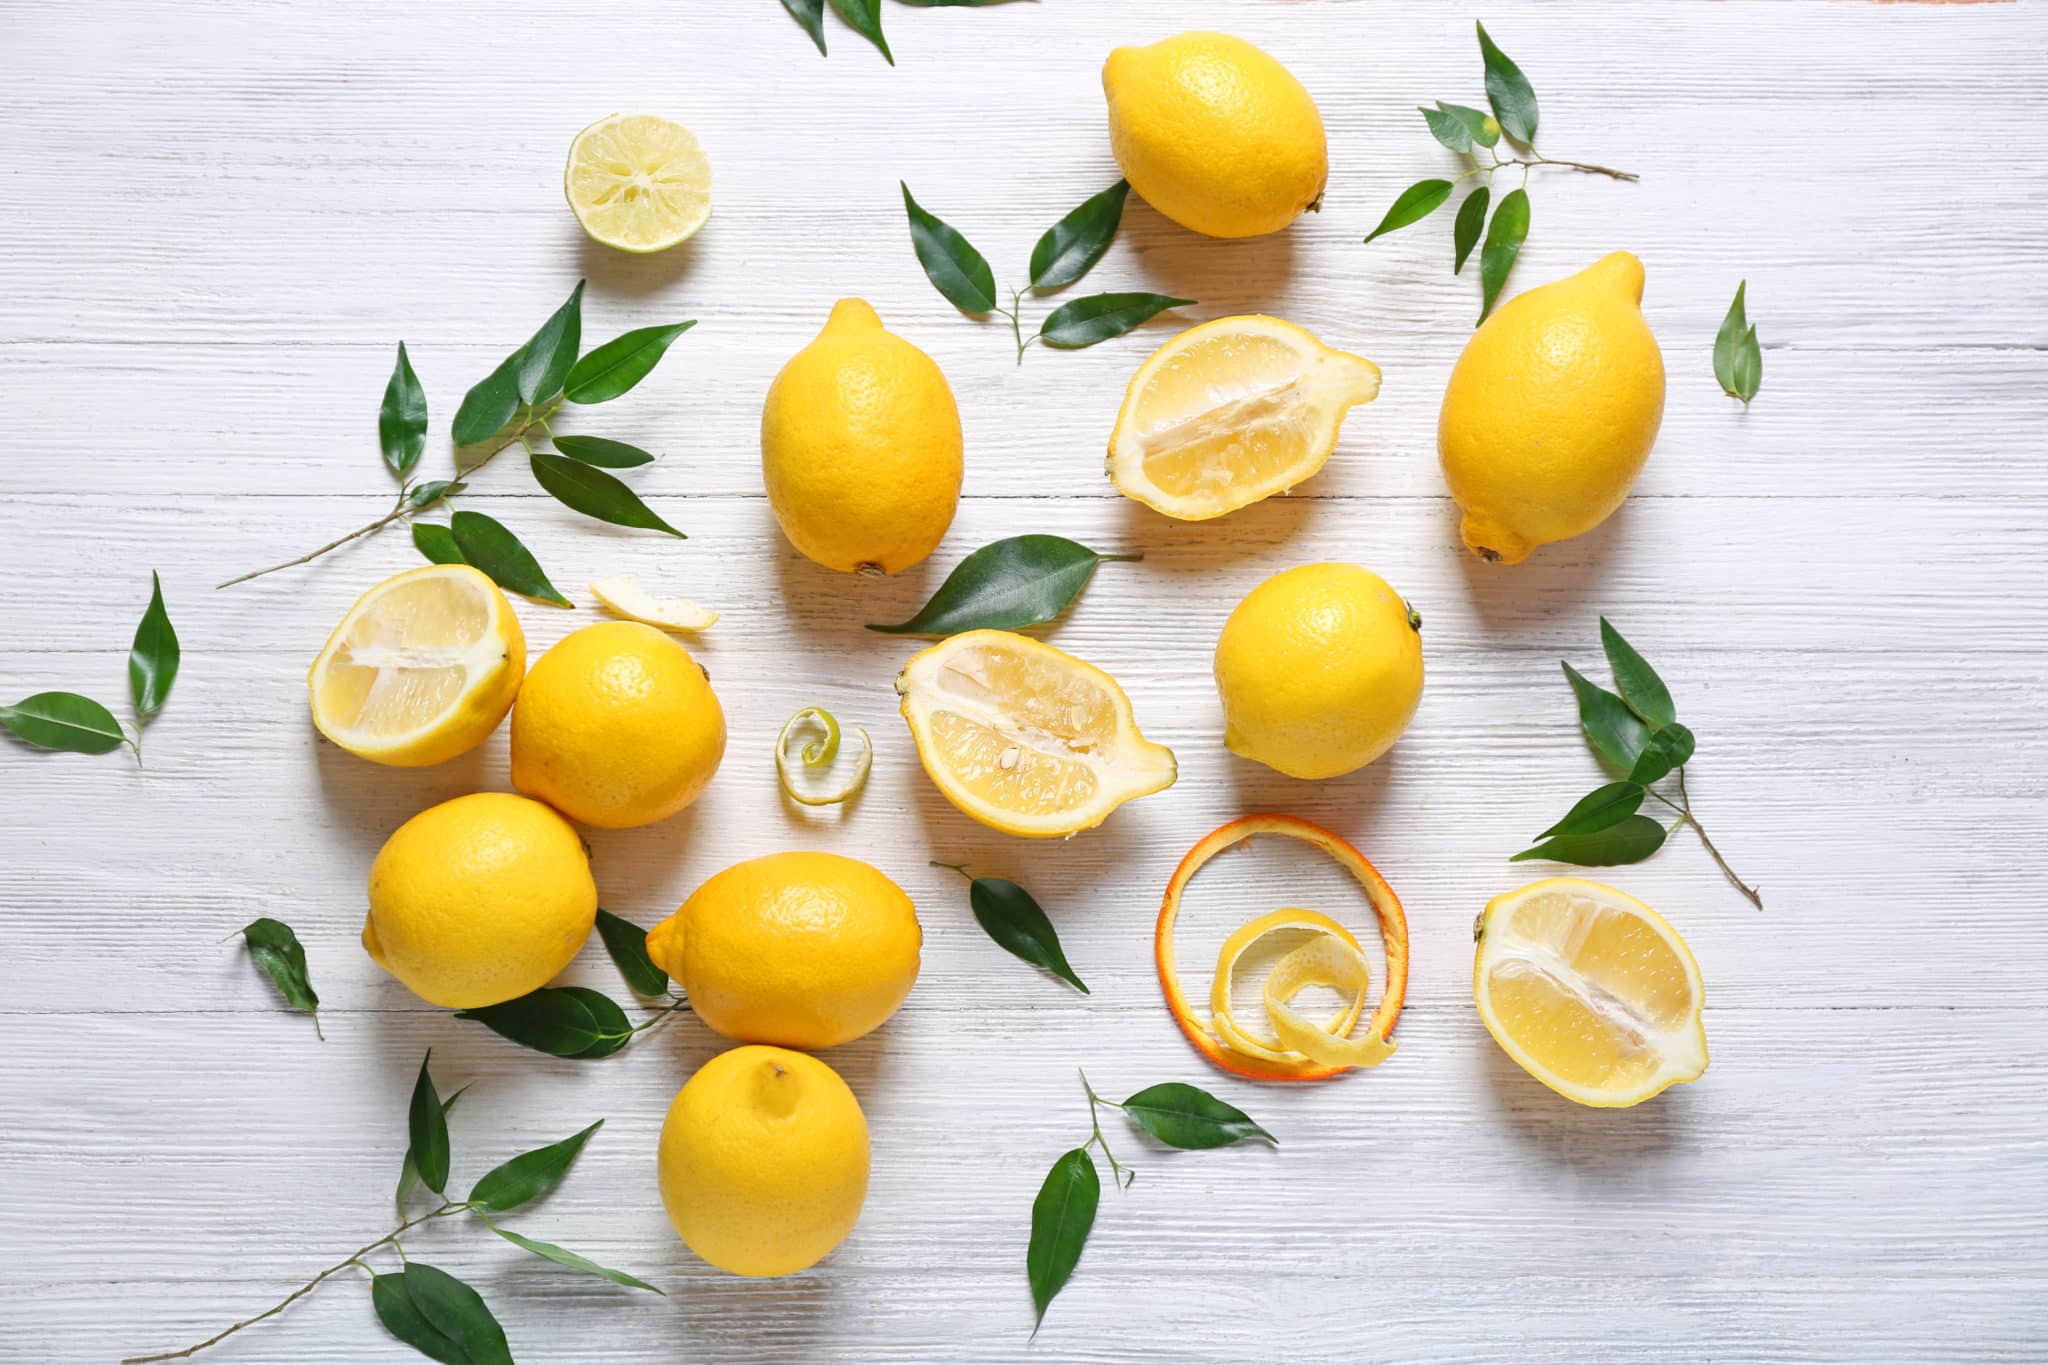 Is drinking lemon water bad for your teeth? Find out here.